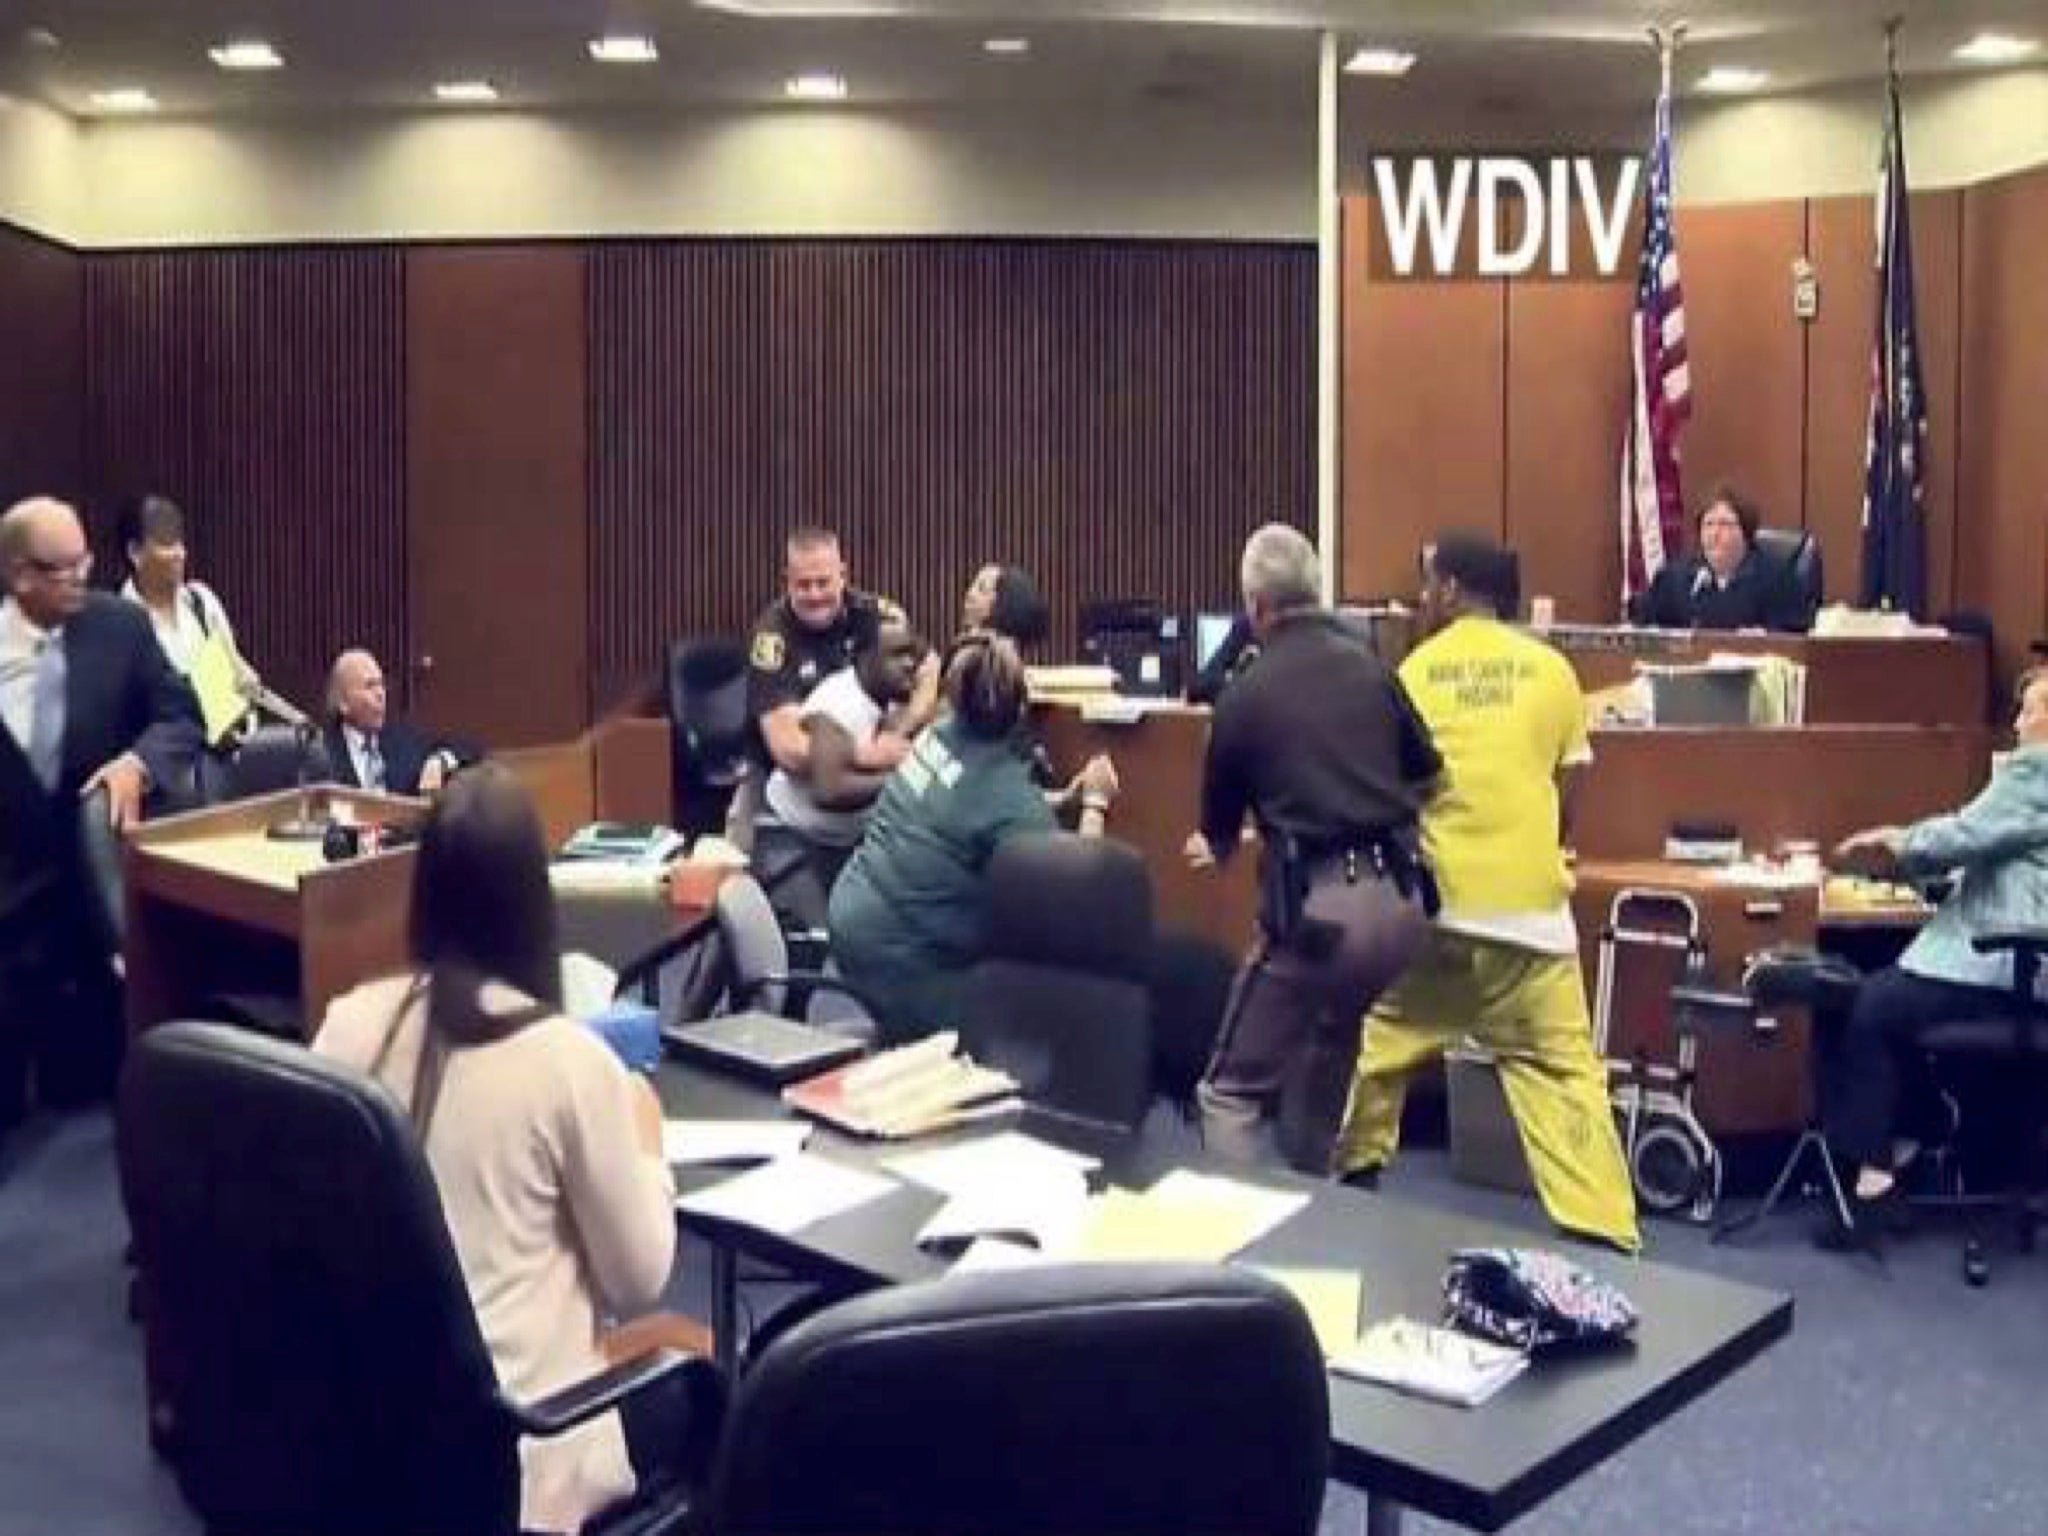 Chaos broke out in the Detroit courtroom